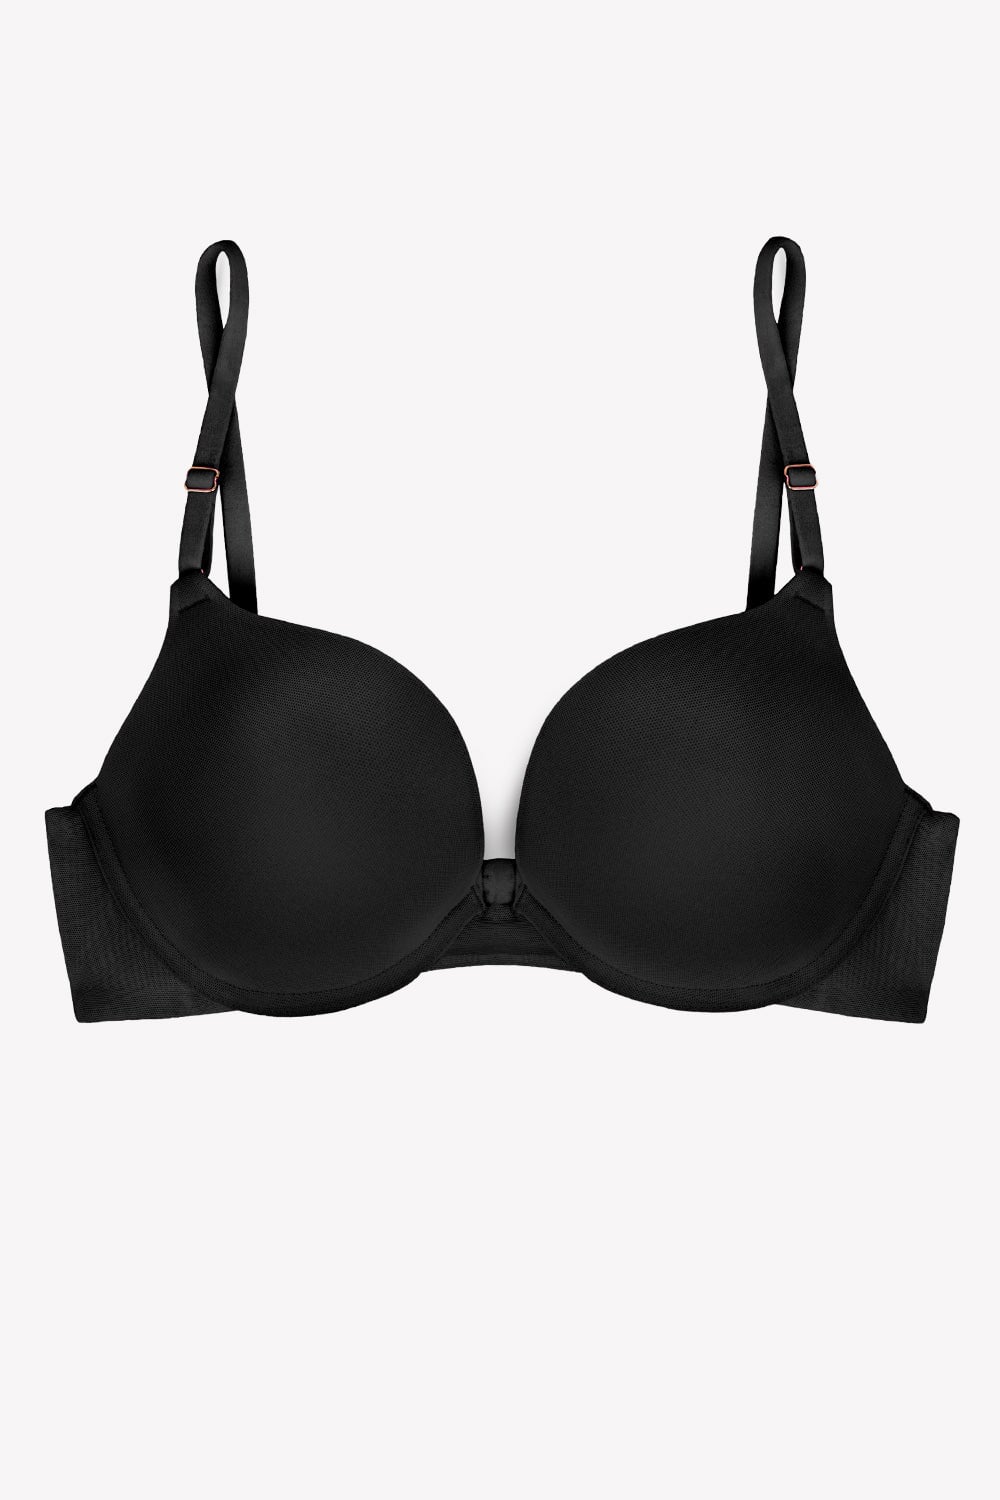 Add Two Cups Bras Brassiere for Women Push Up Padded Unlined (Black, 34B)  price in UAE,  UAE